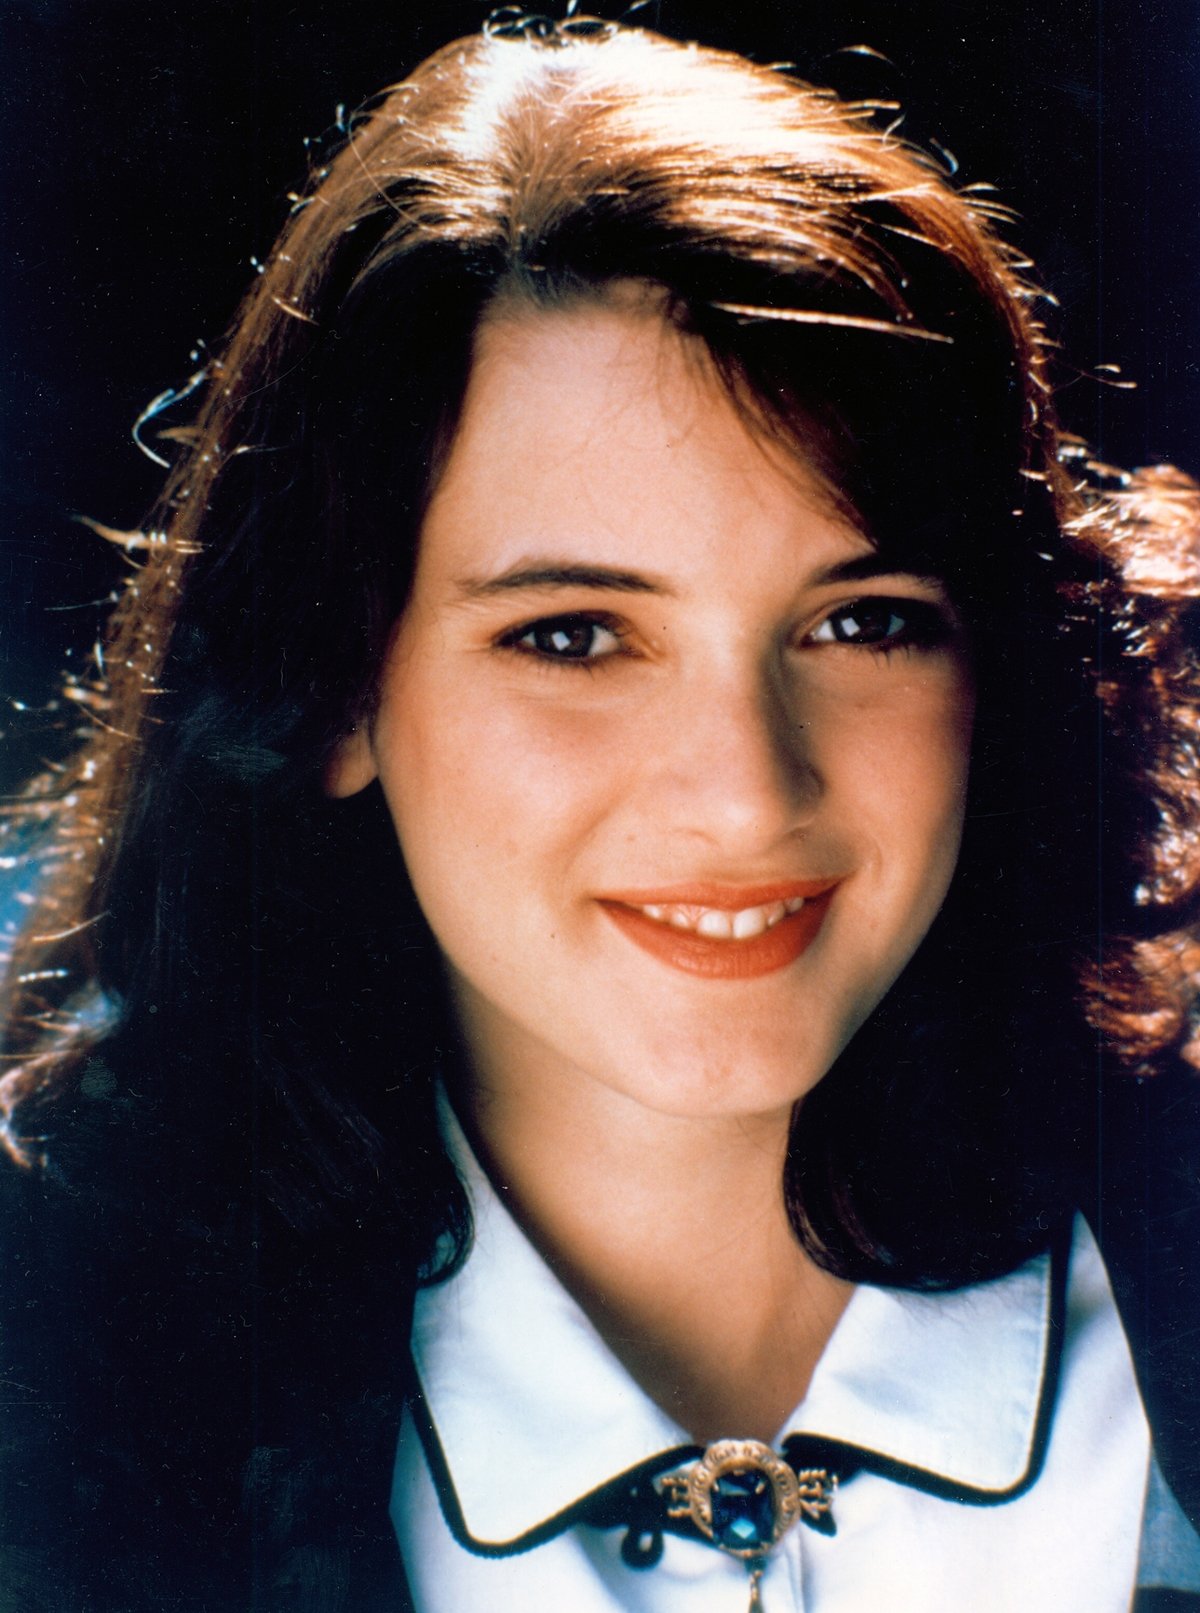 Winona Ryder rose to prominence with her role as Veronica Sawyer in the 1989 American black comedy teen film Heathers